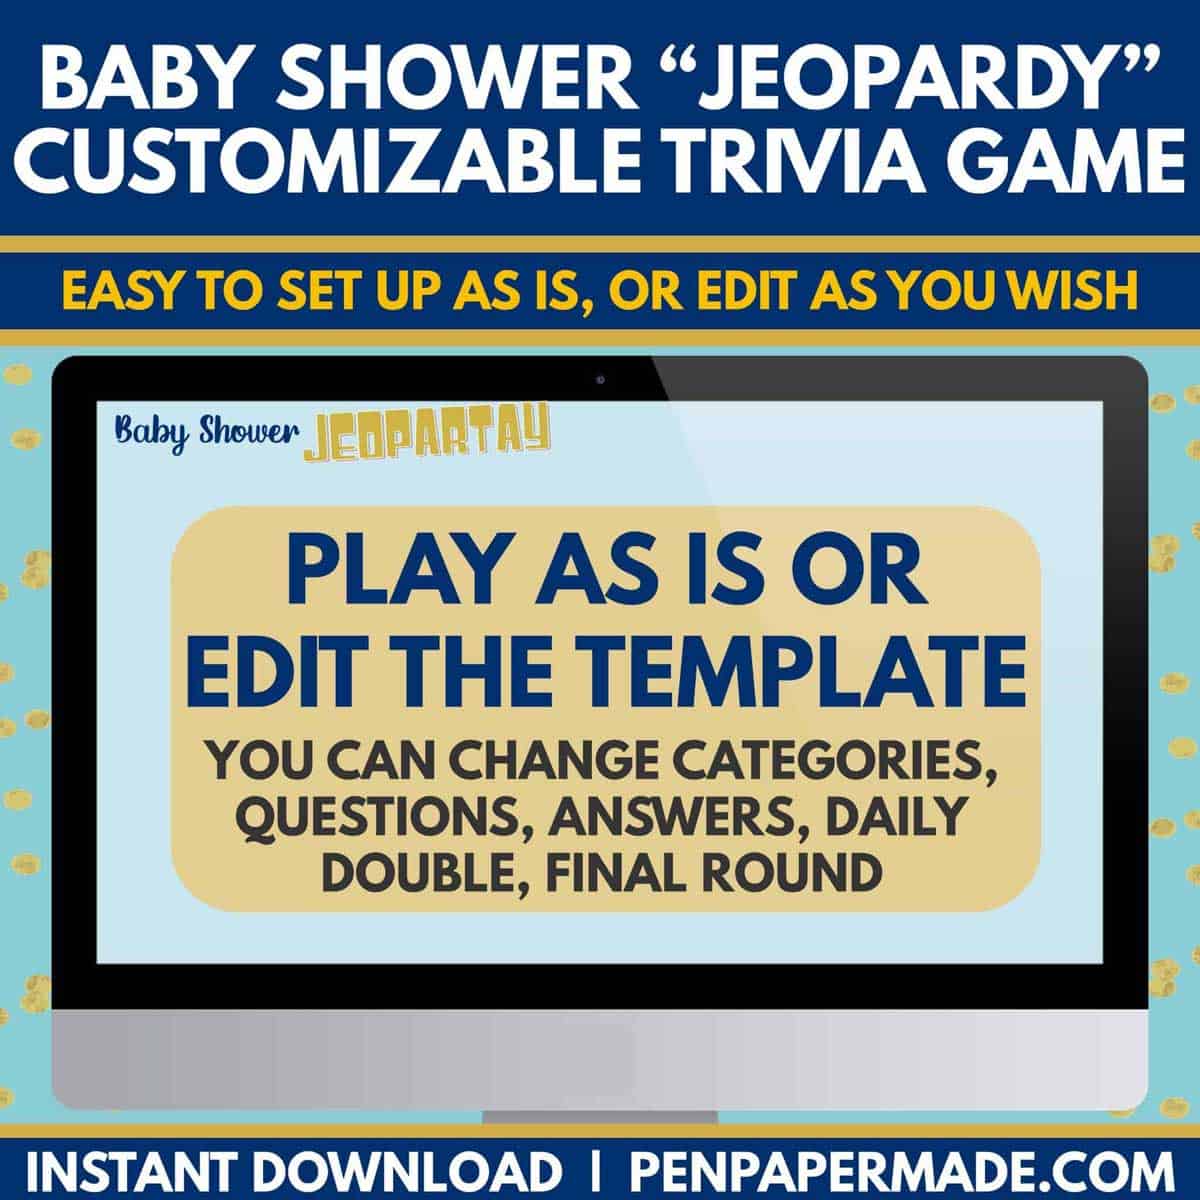 pre-loaded blue baby shower jeopardy questions to play as is or edit template with own questions.